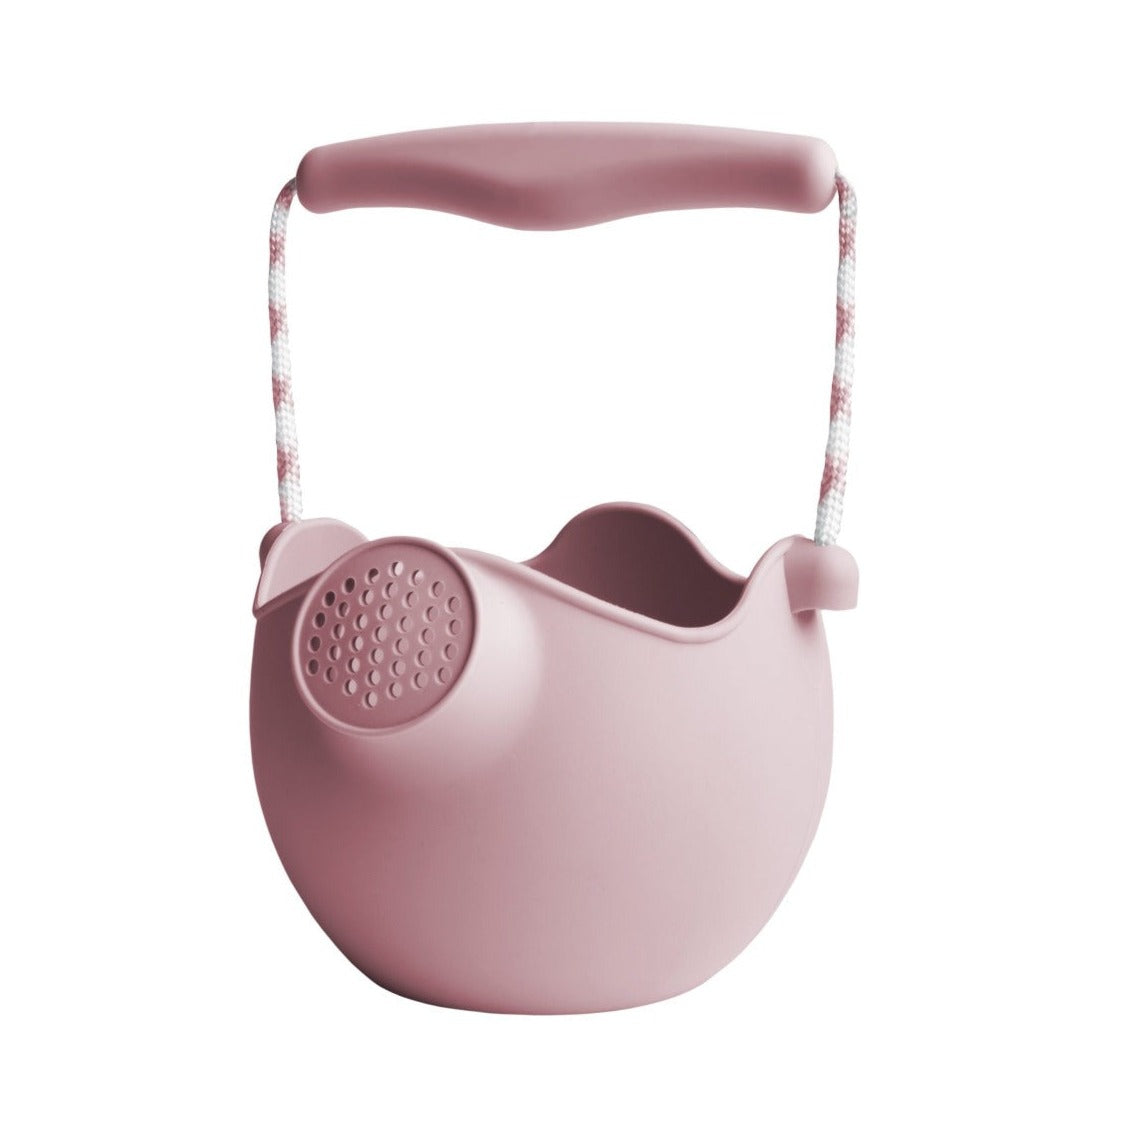 Scrunch Watering Can in Dusty Rose | Scrunch Beach Toys available at Bear & Moo